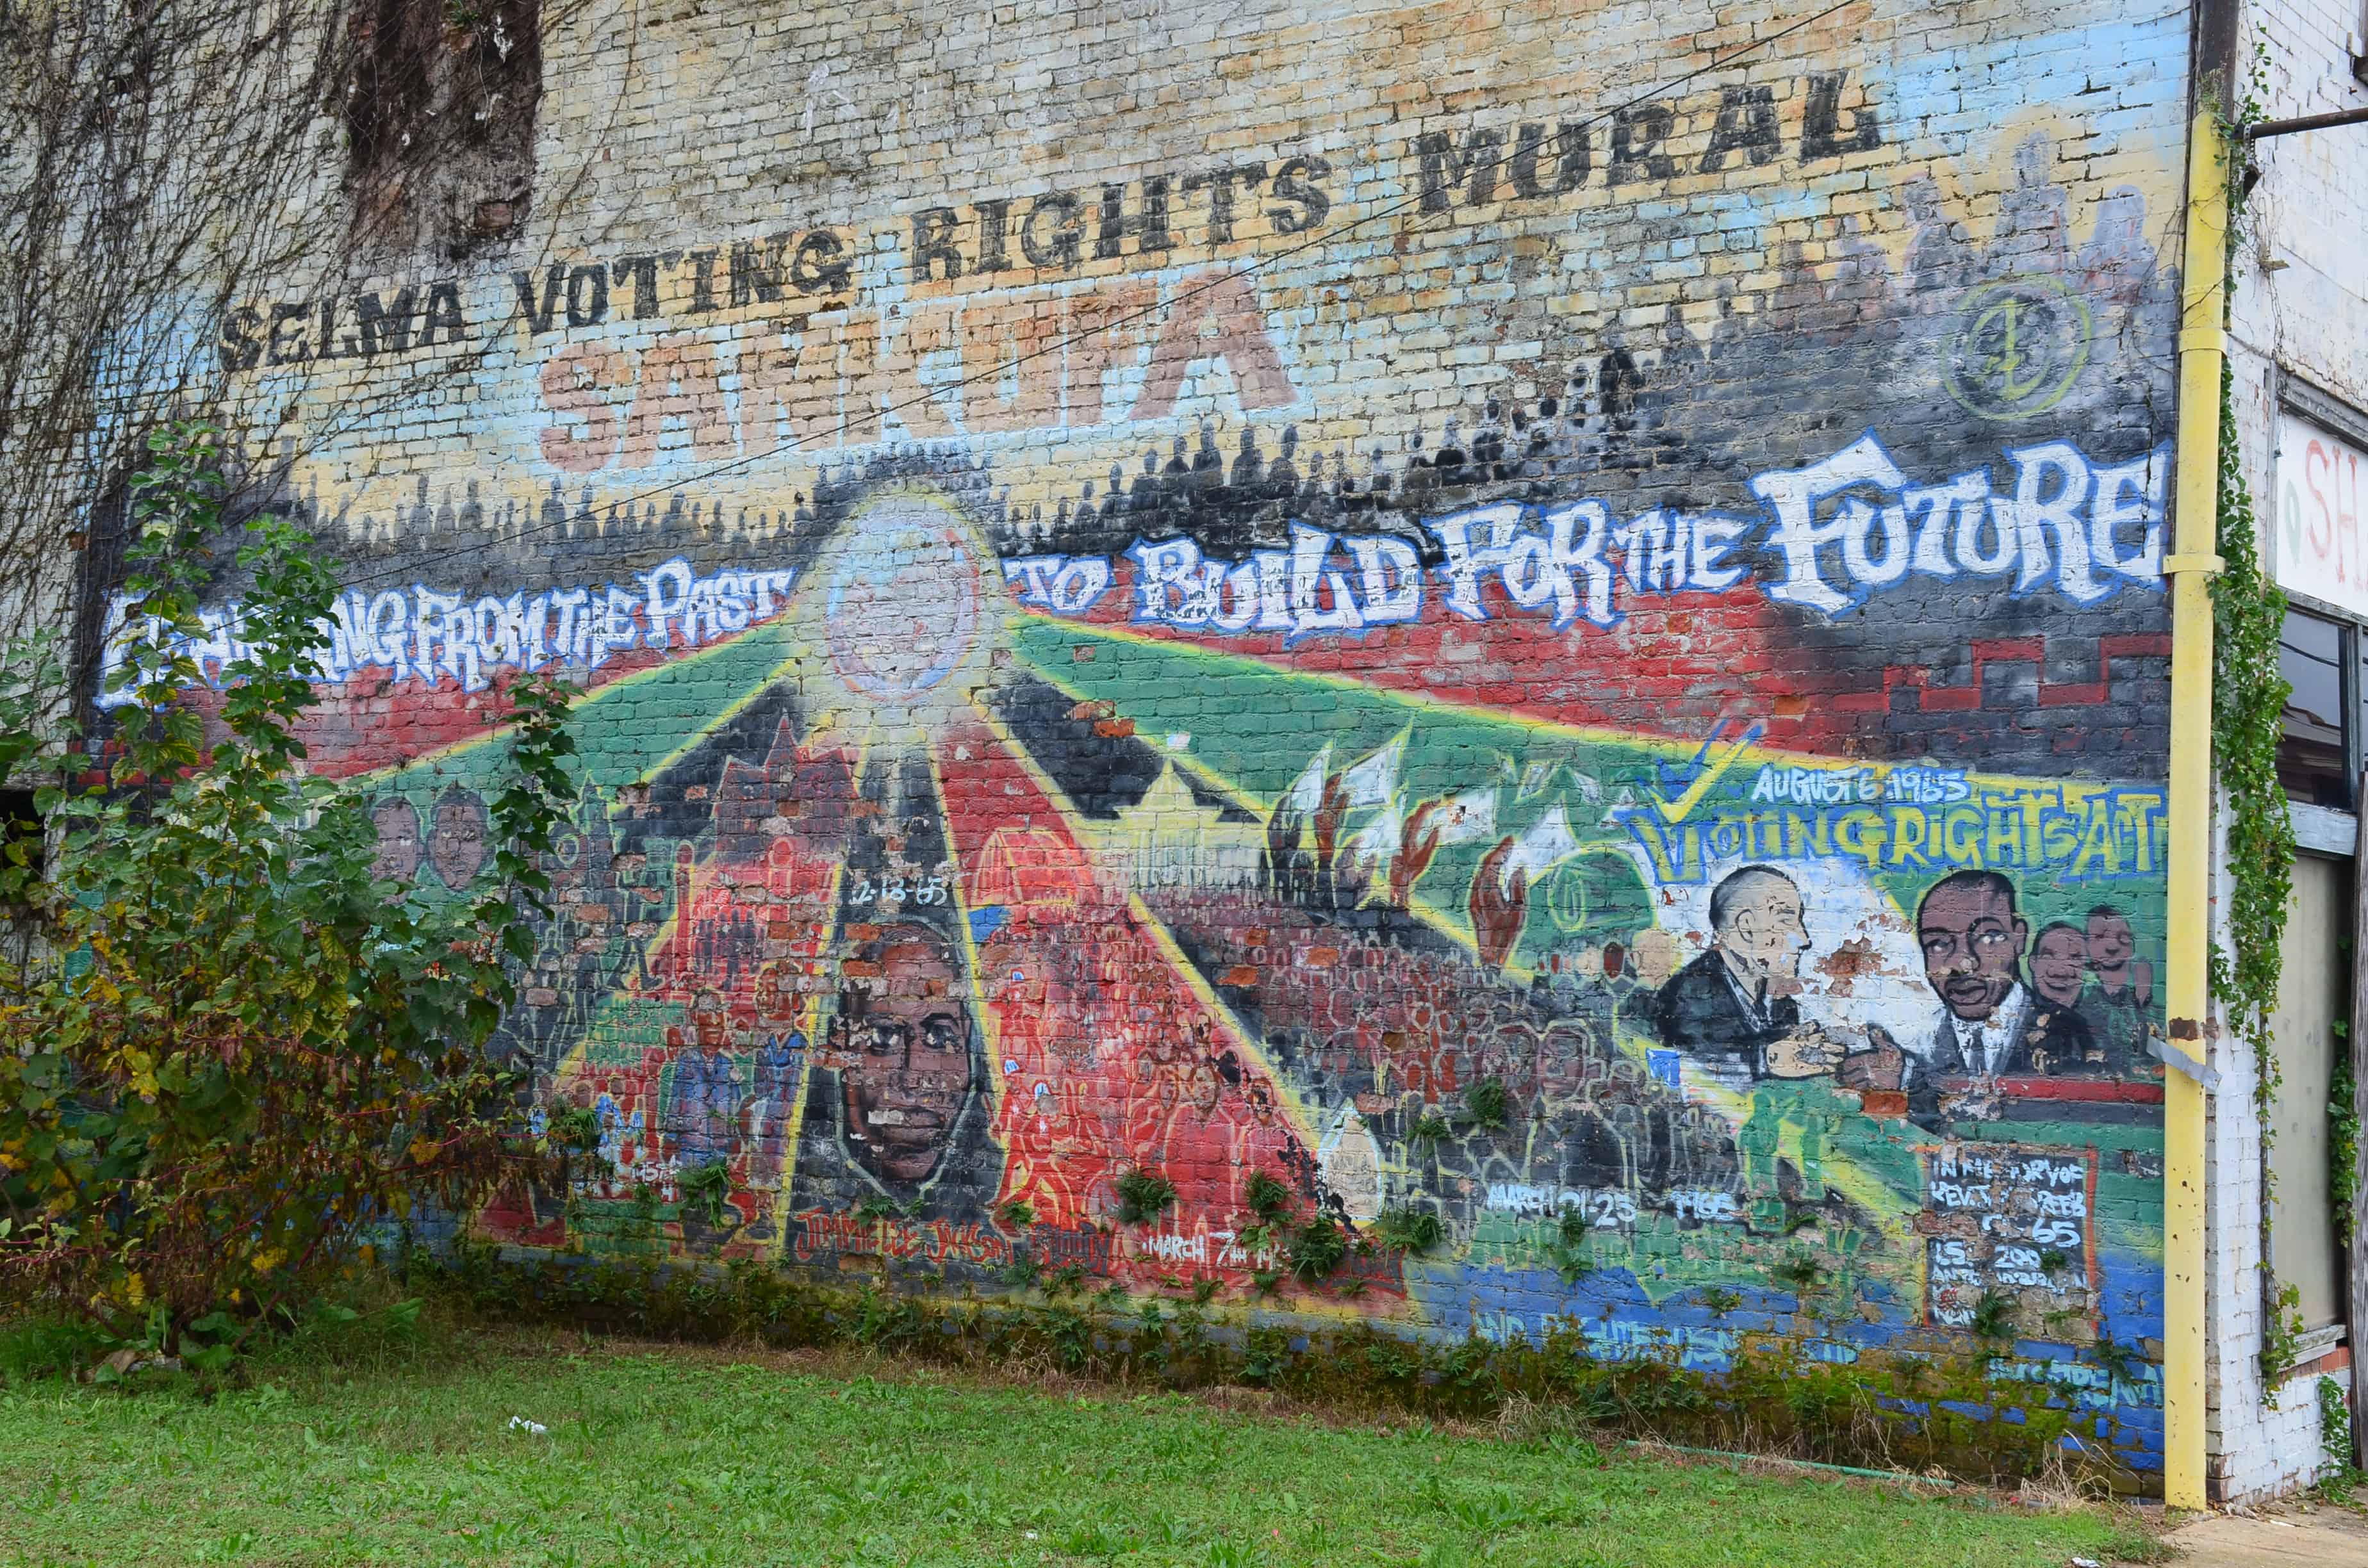 Voting Rights mural in Selma, Alabama